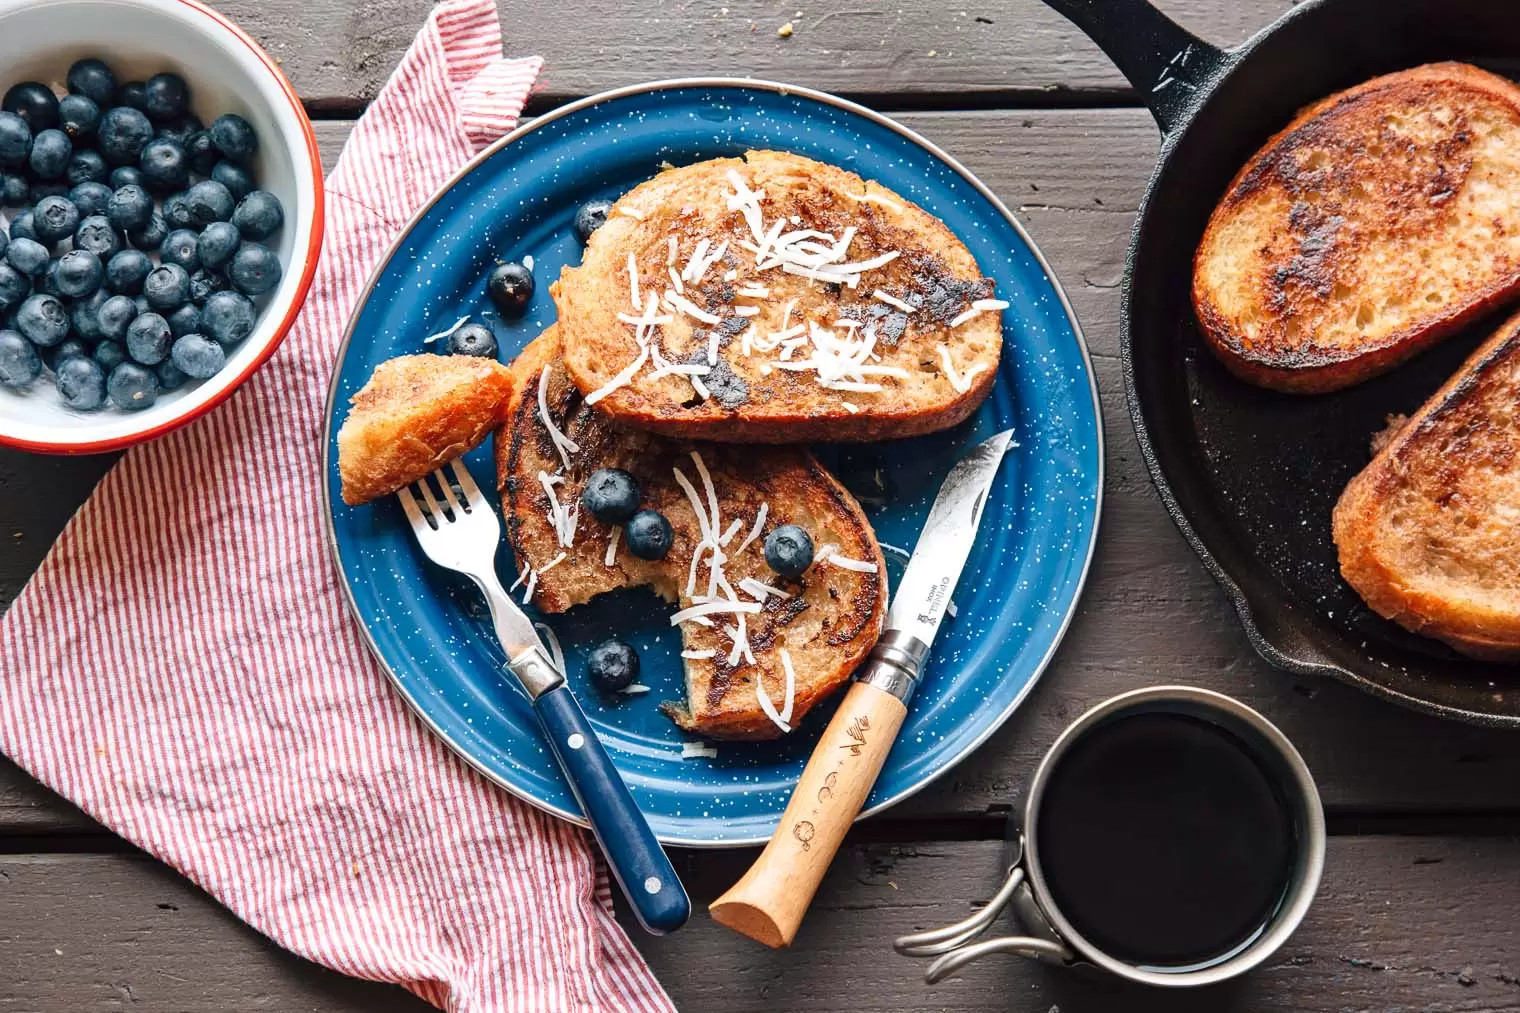 Three pieces of French toast on a blue enamel plate